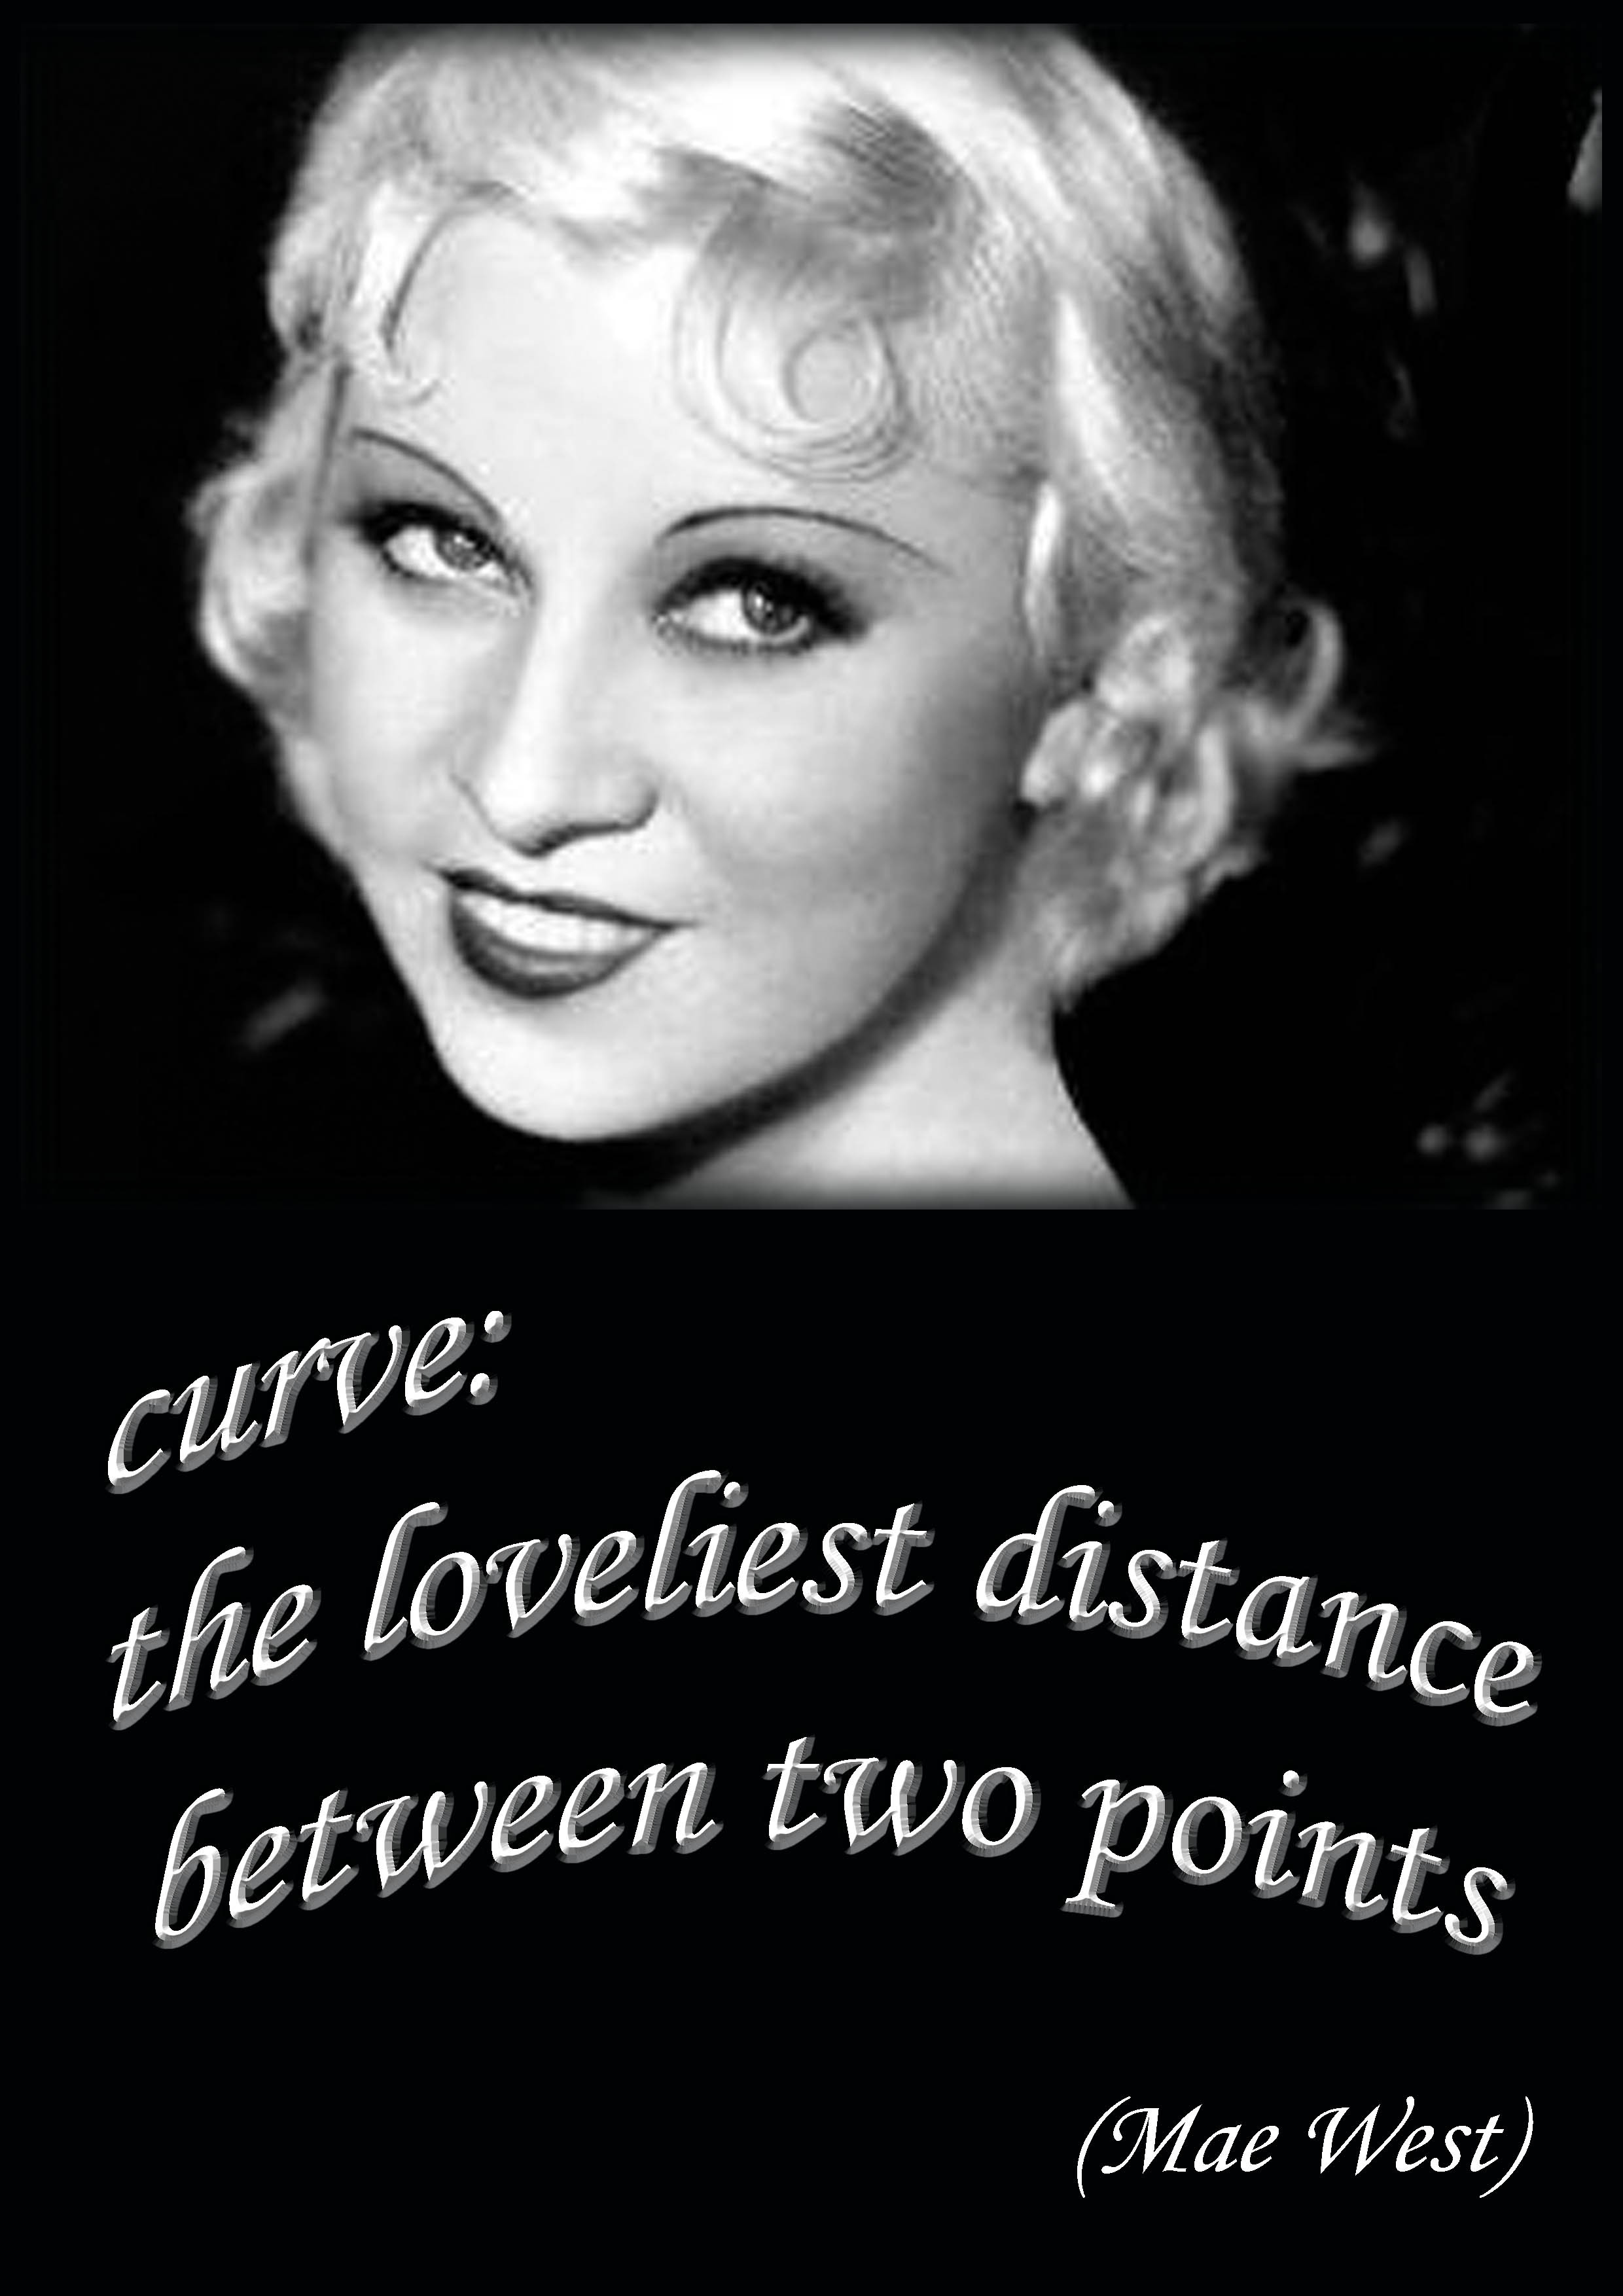 Mae West Quotes To Share On Facebook Quotesgram